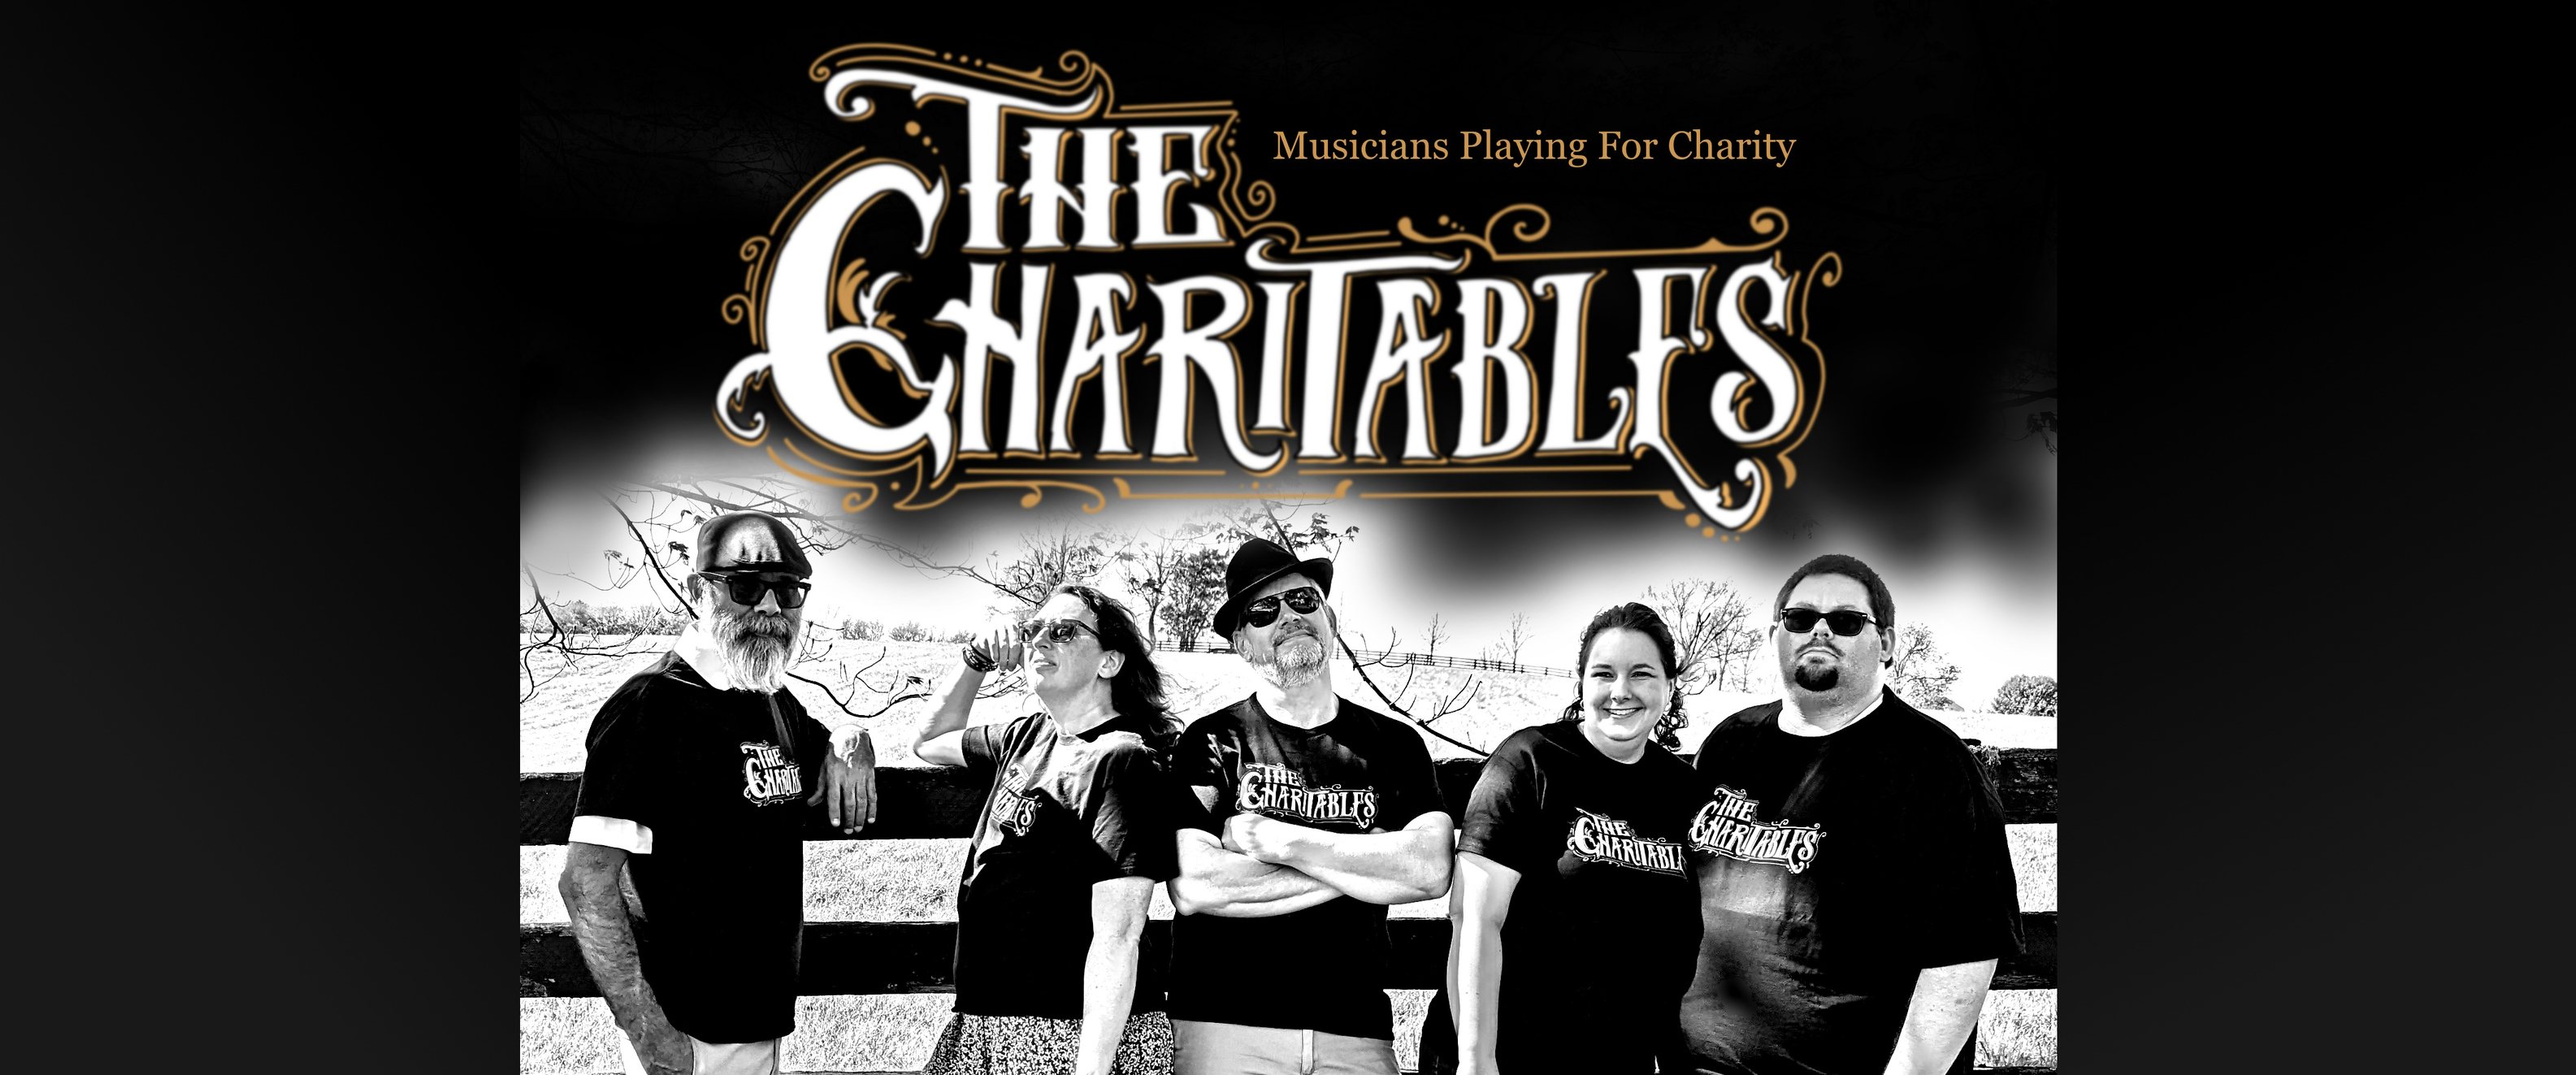  The Charitables Band